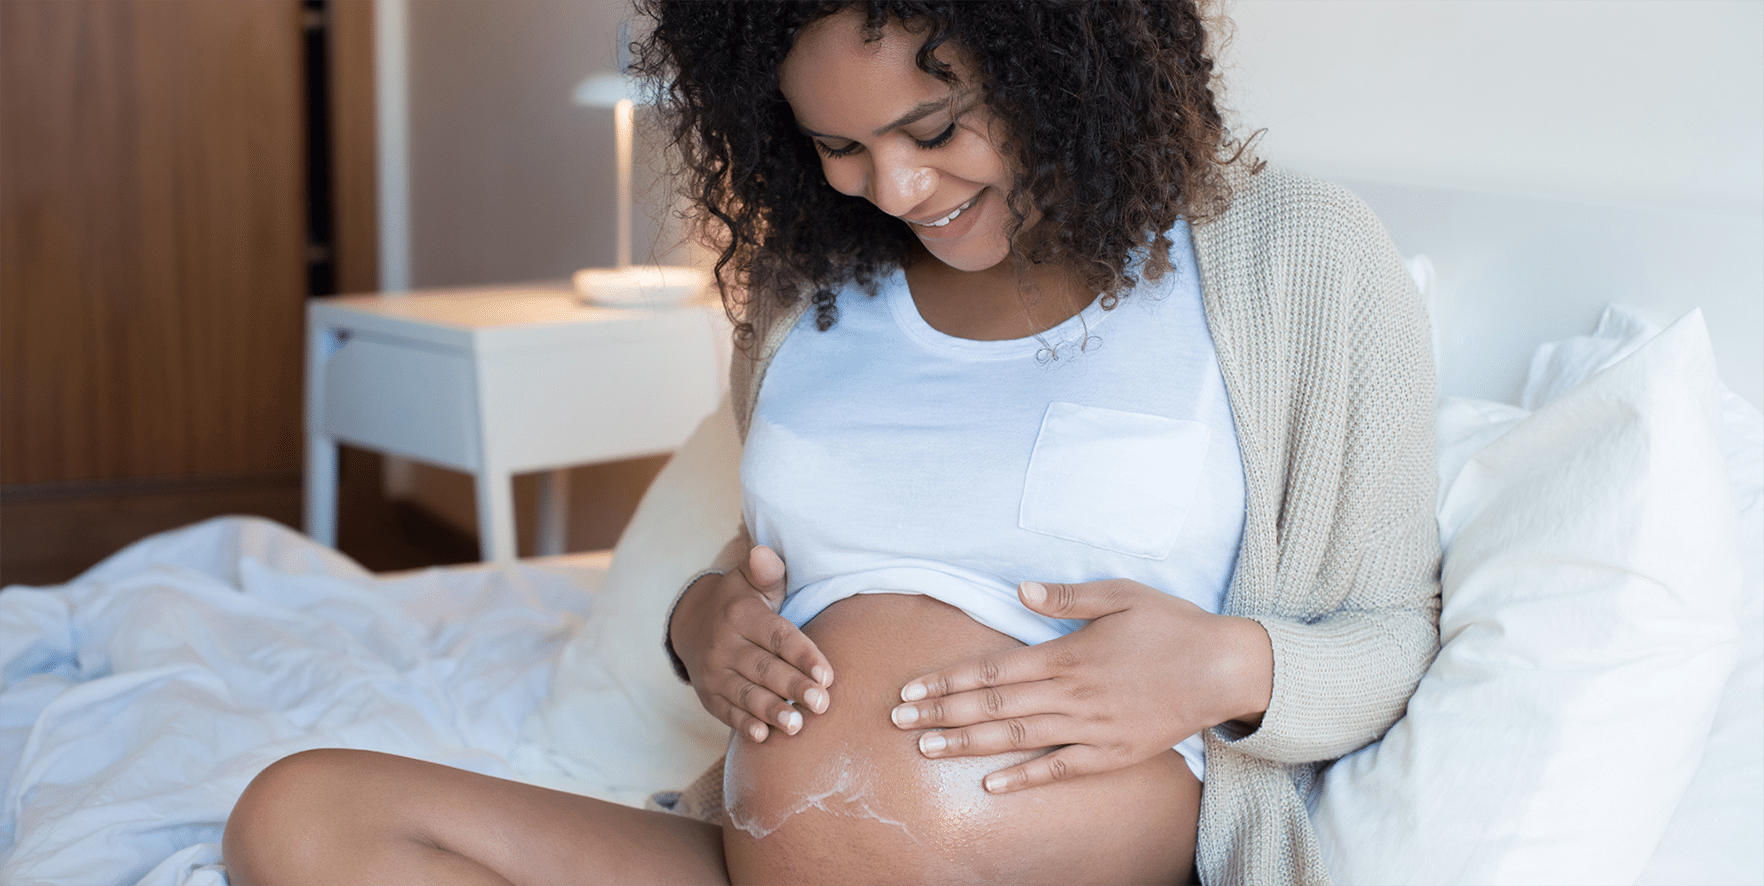 Pregnant woman sitting on a bed rubbing lotion on her belly